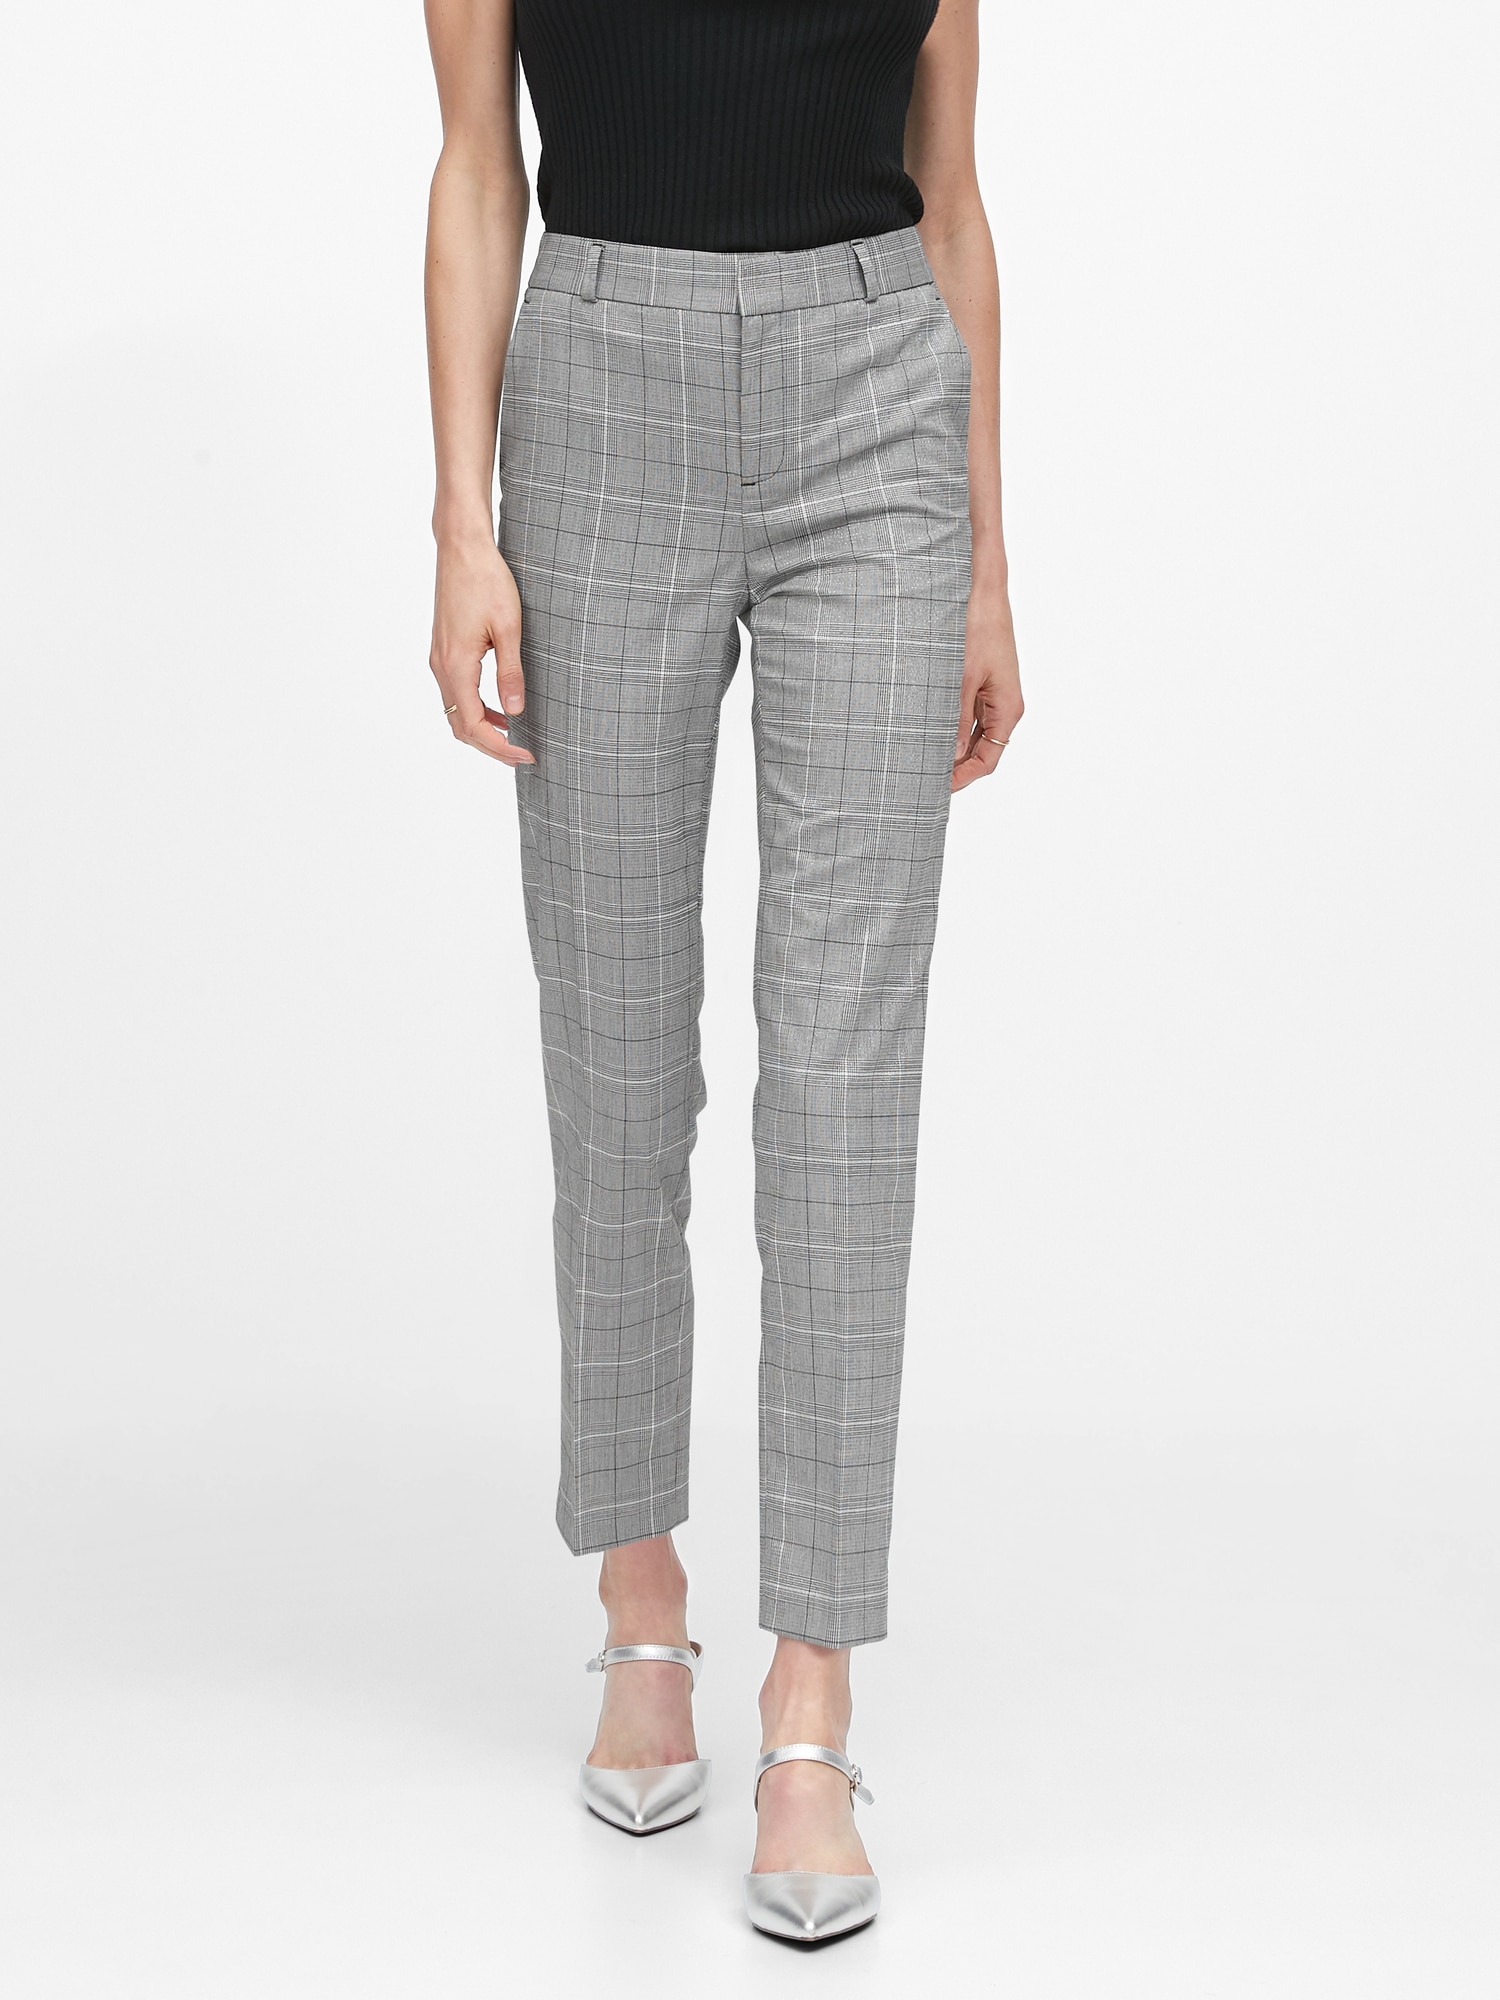 Avery Straight-Fit Metallic Ankle Pant